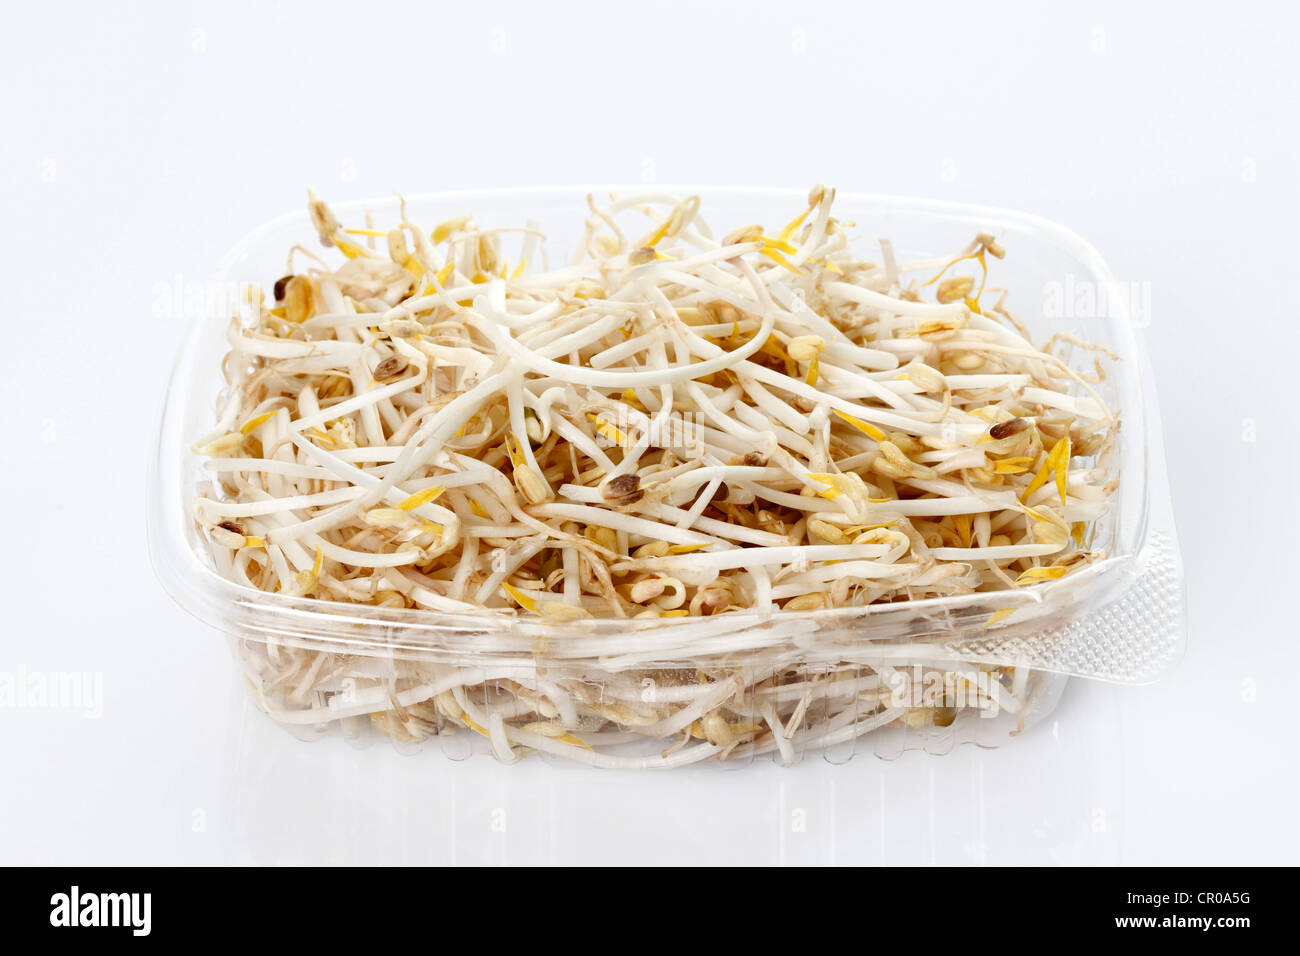 Bean sprouts in a plastic dish, Mung beans (Vigna radiata) Stock Photo